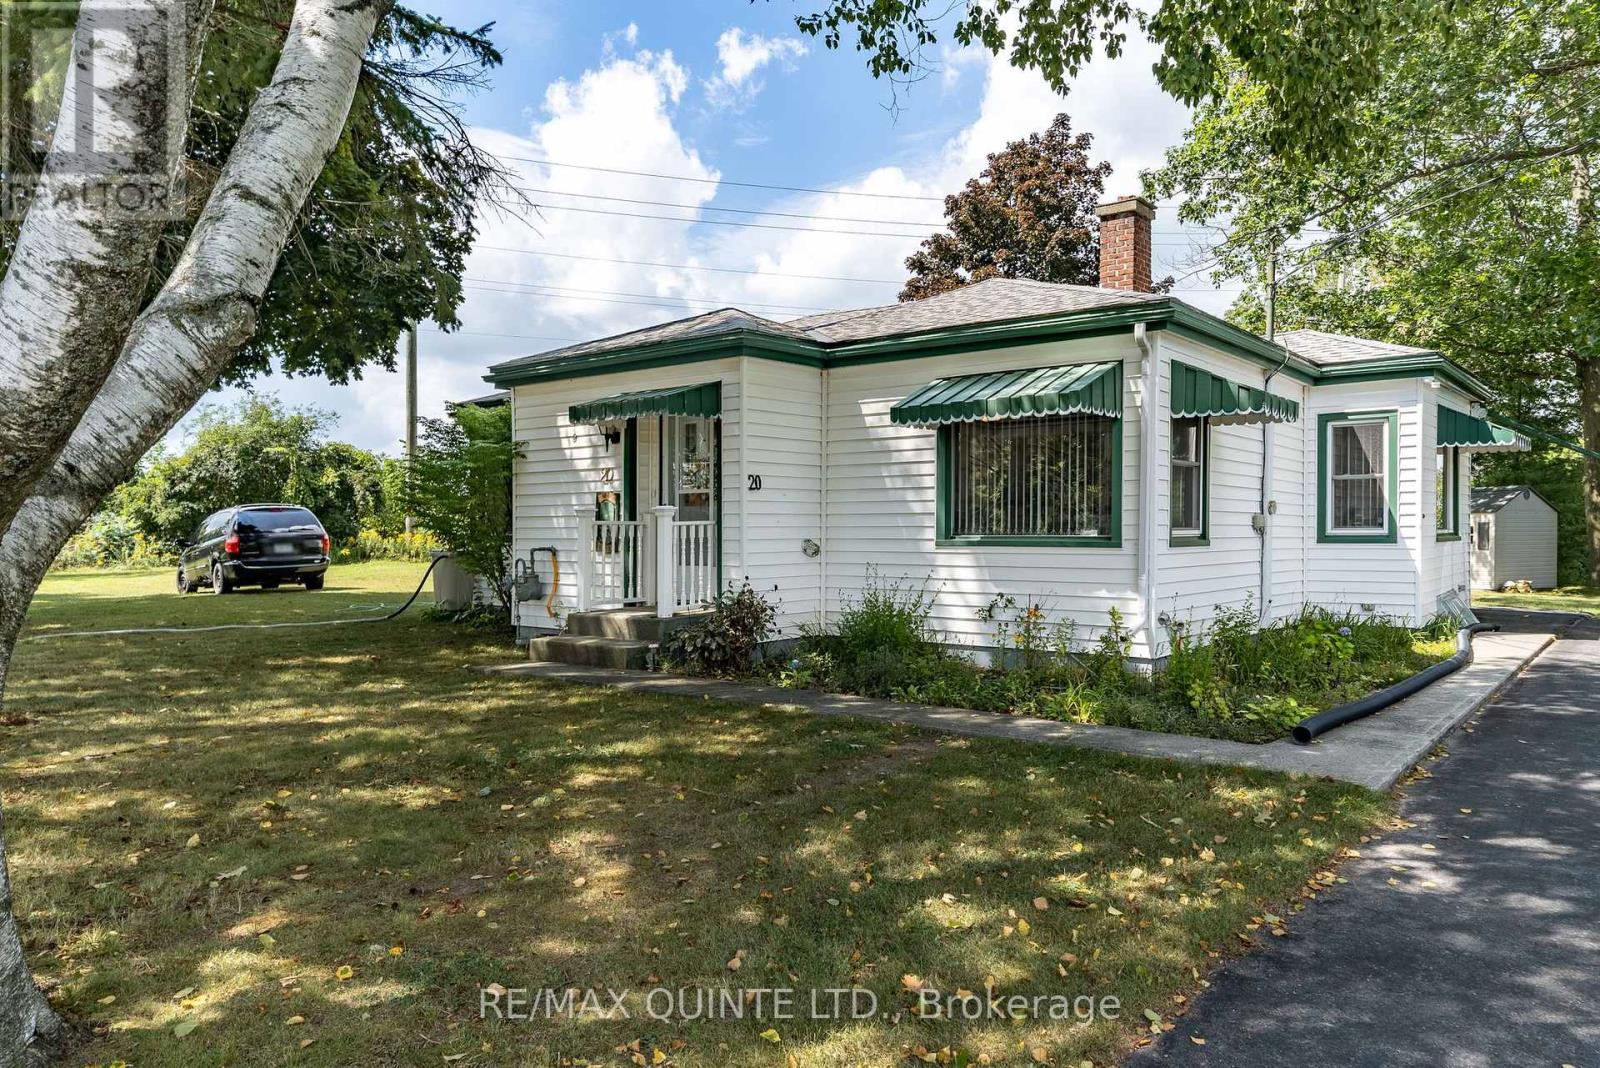 20 ROGER ST, prince edward county, Ontario